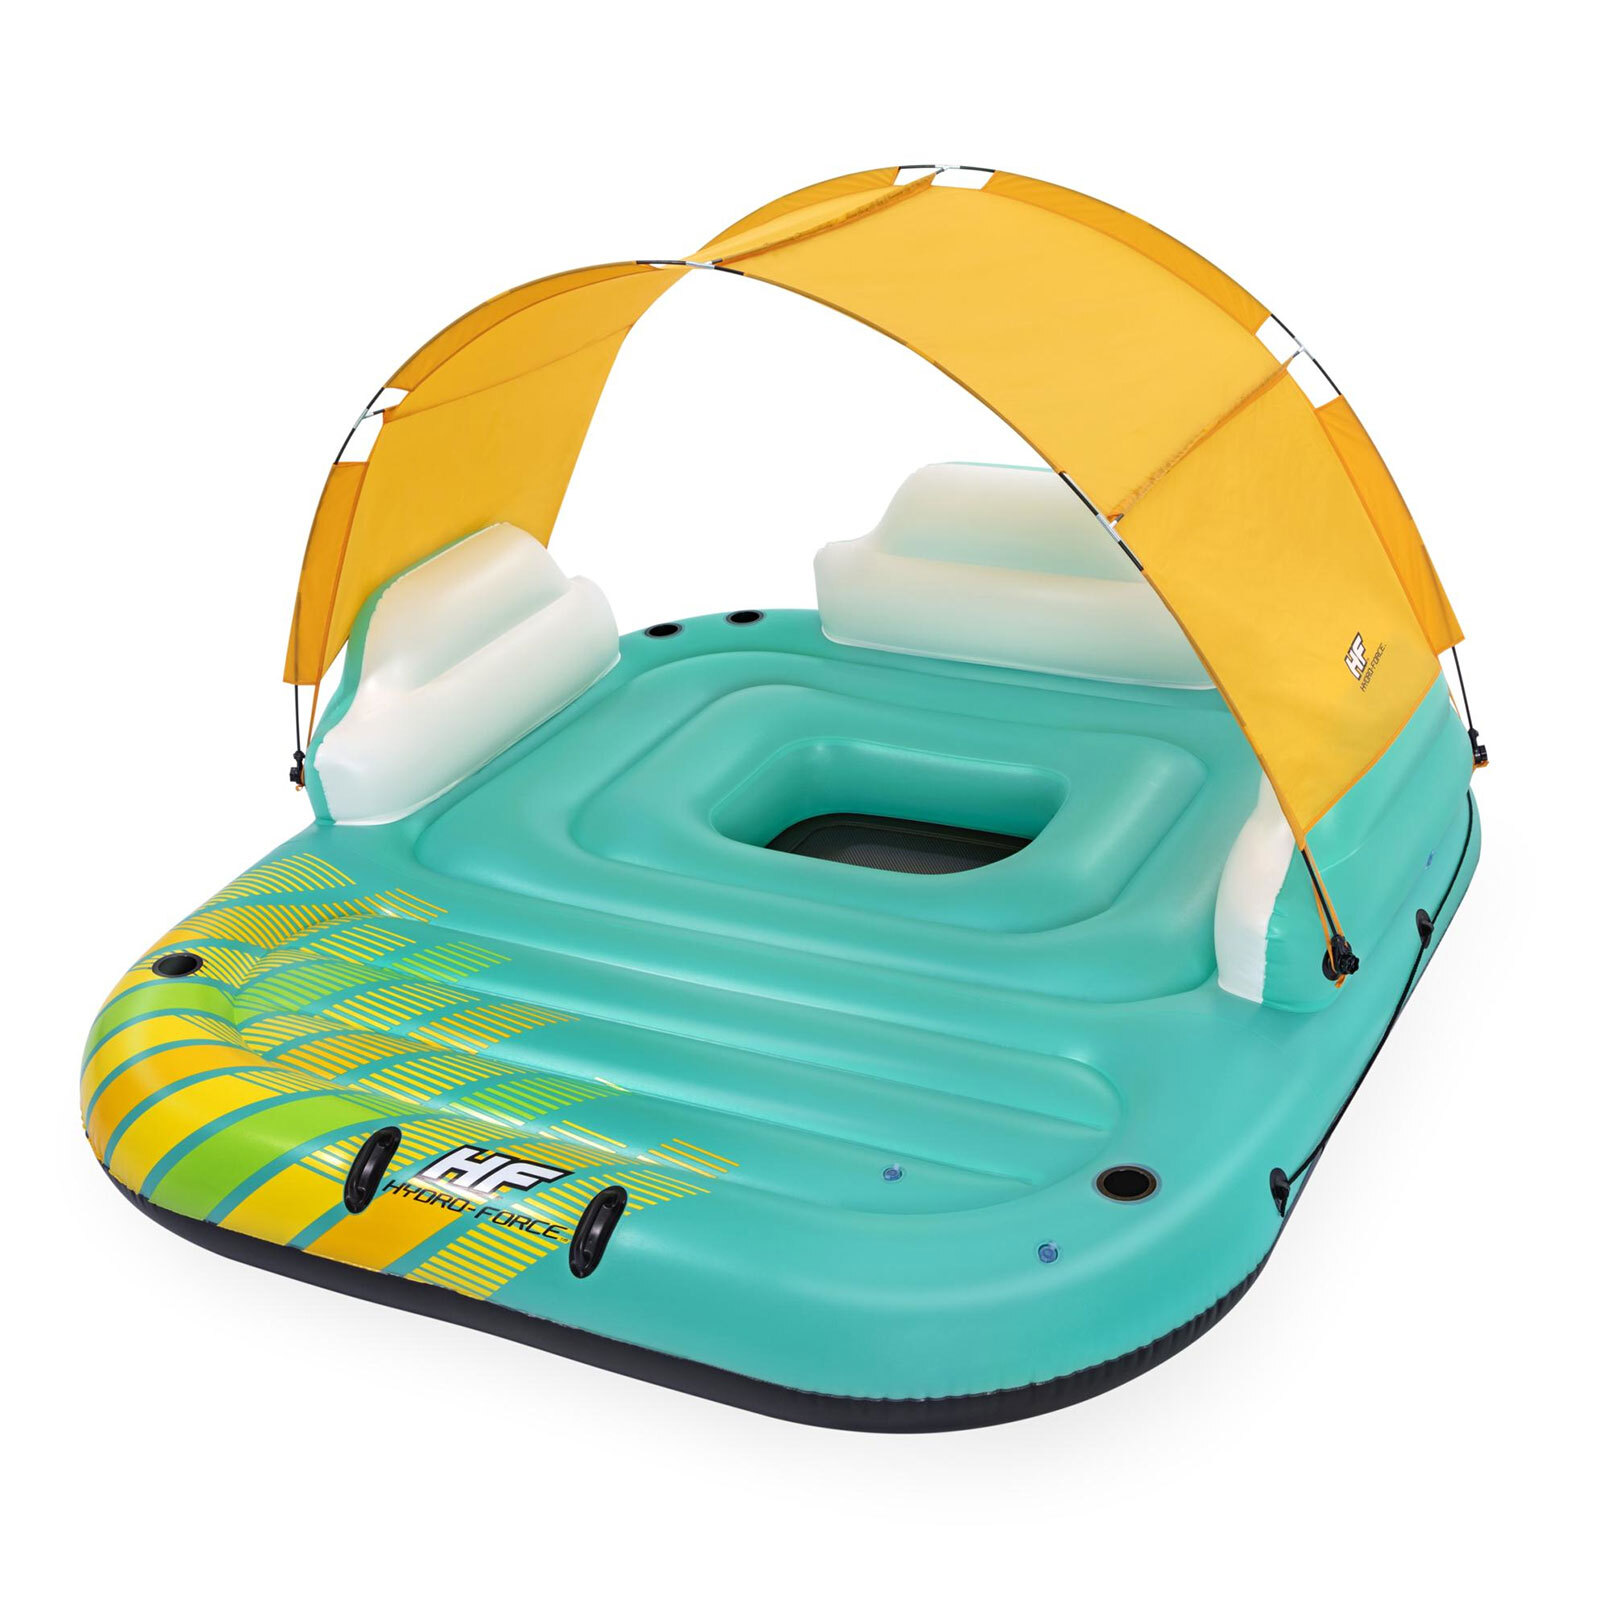 Bestway Inflatable Pool Beach Lake Float Floating island with